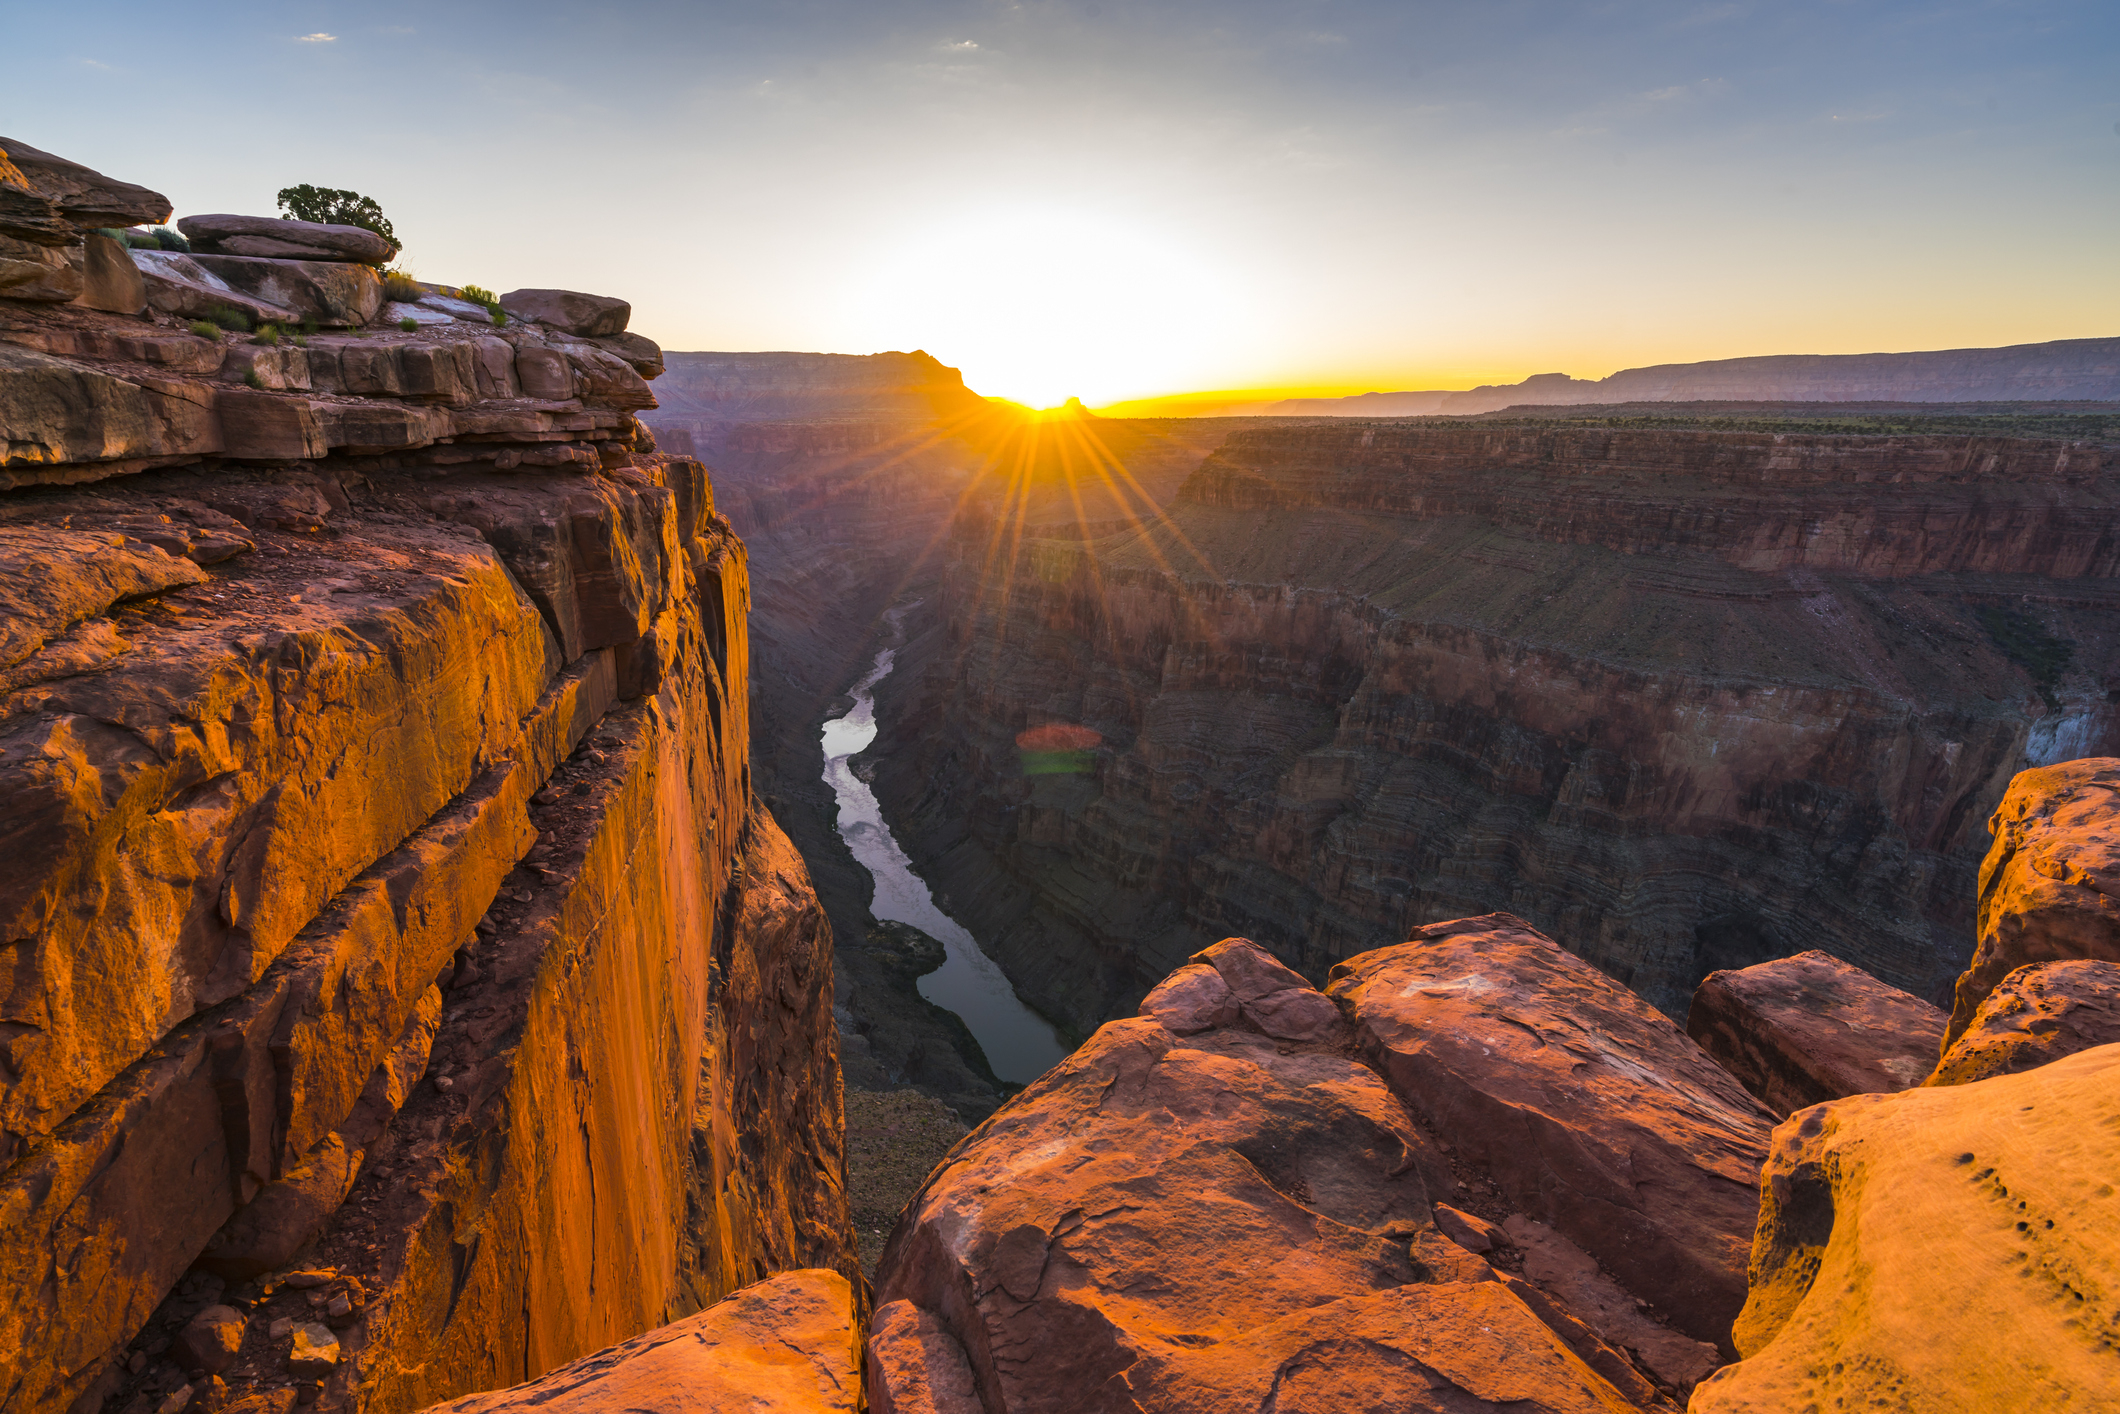 The Grand Canyon with the sun just over the horizon